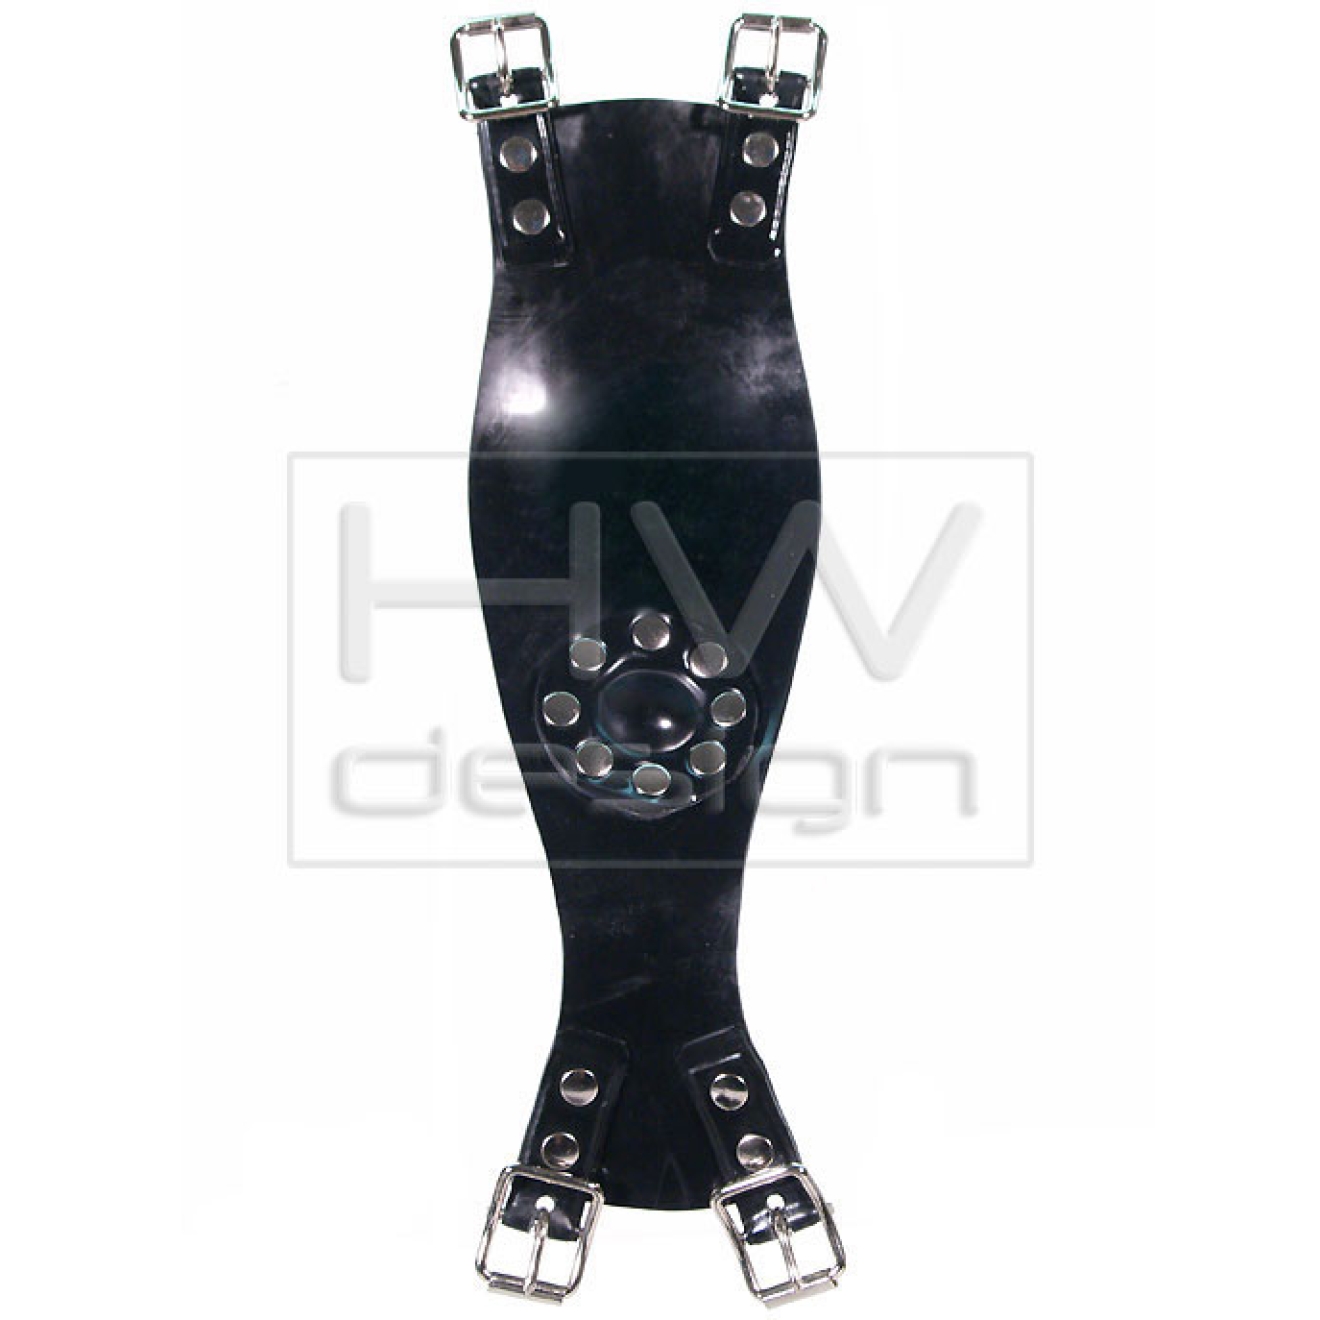 Hwd 10d Crotch Piece With Anal Dildo Hw Fashion Latex Rubber Heavy